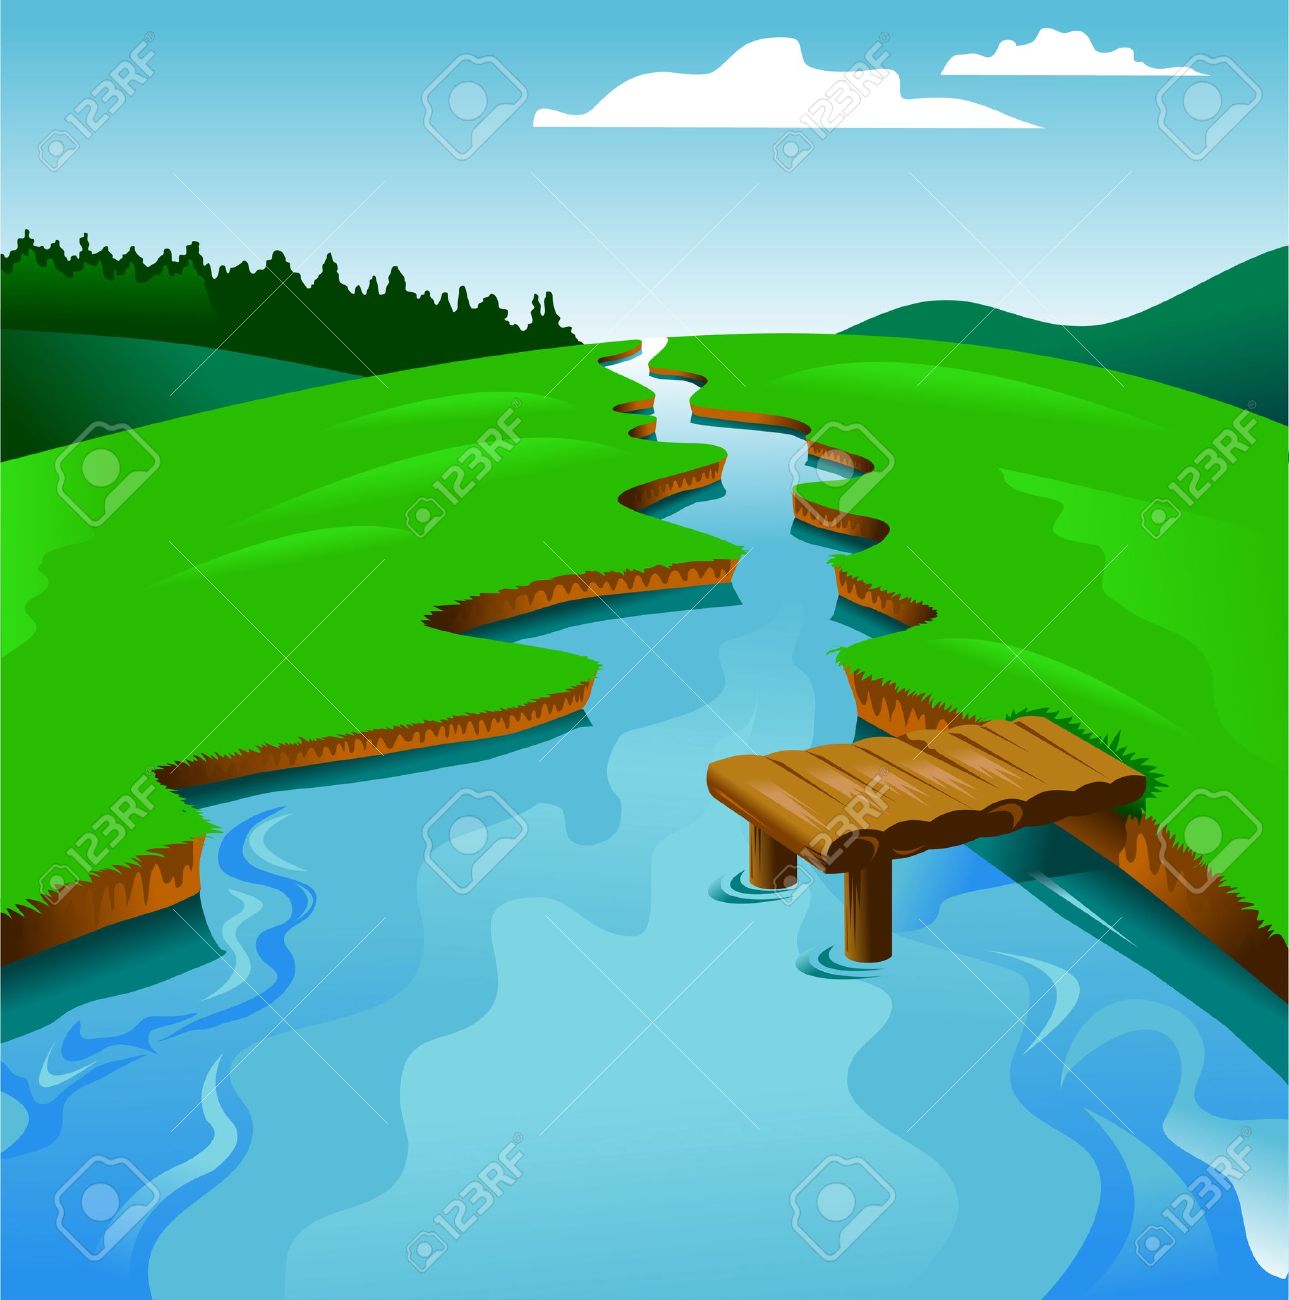 Free River Clipart Png, Download Free River Clipart Png png images ...